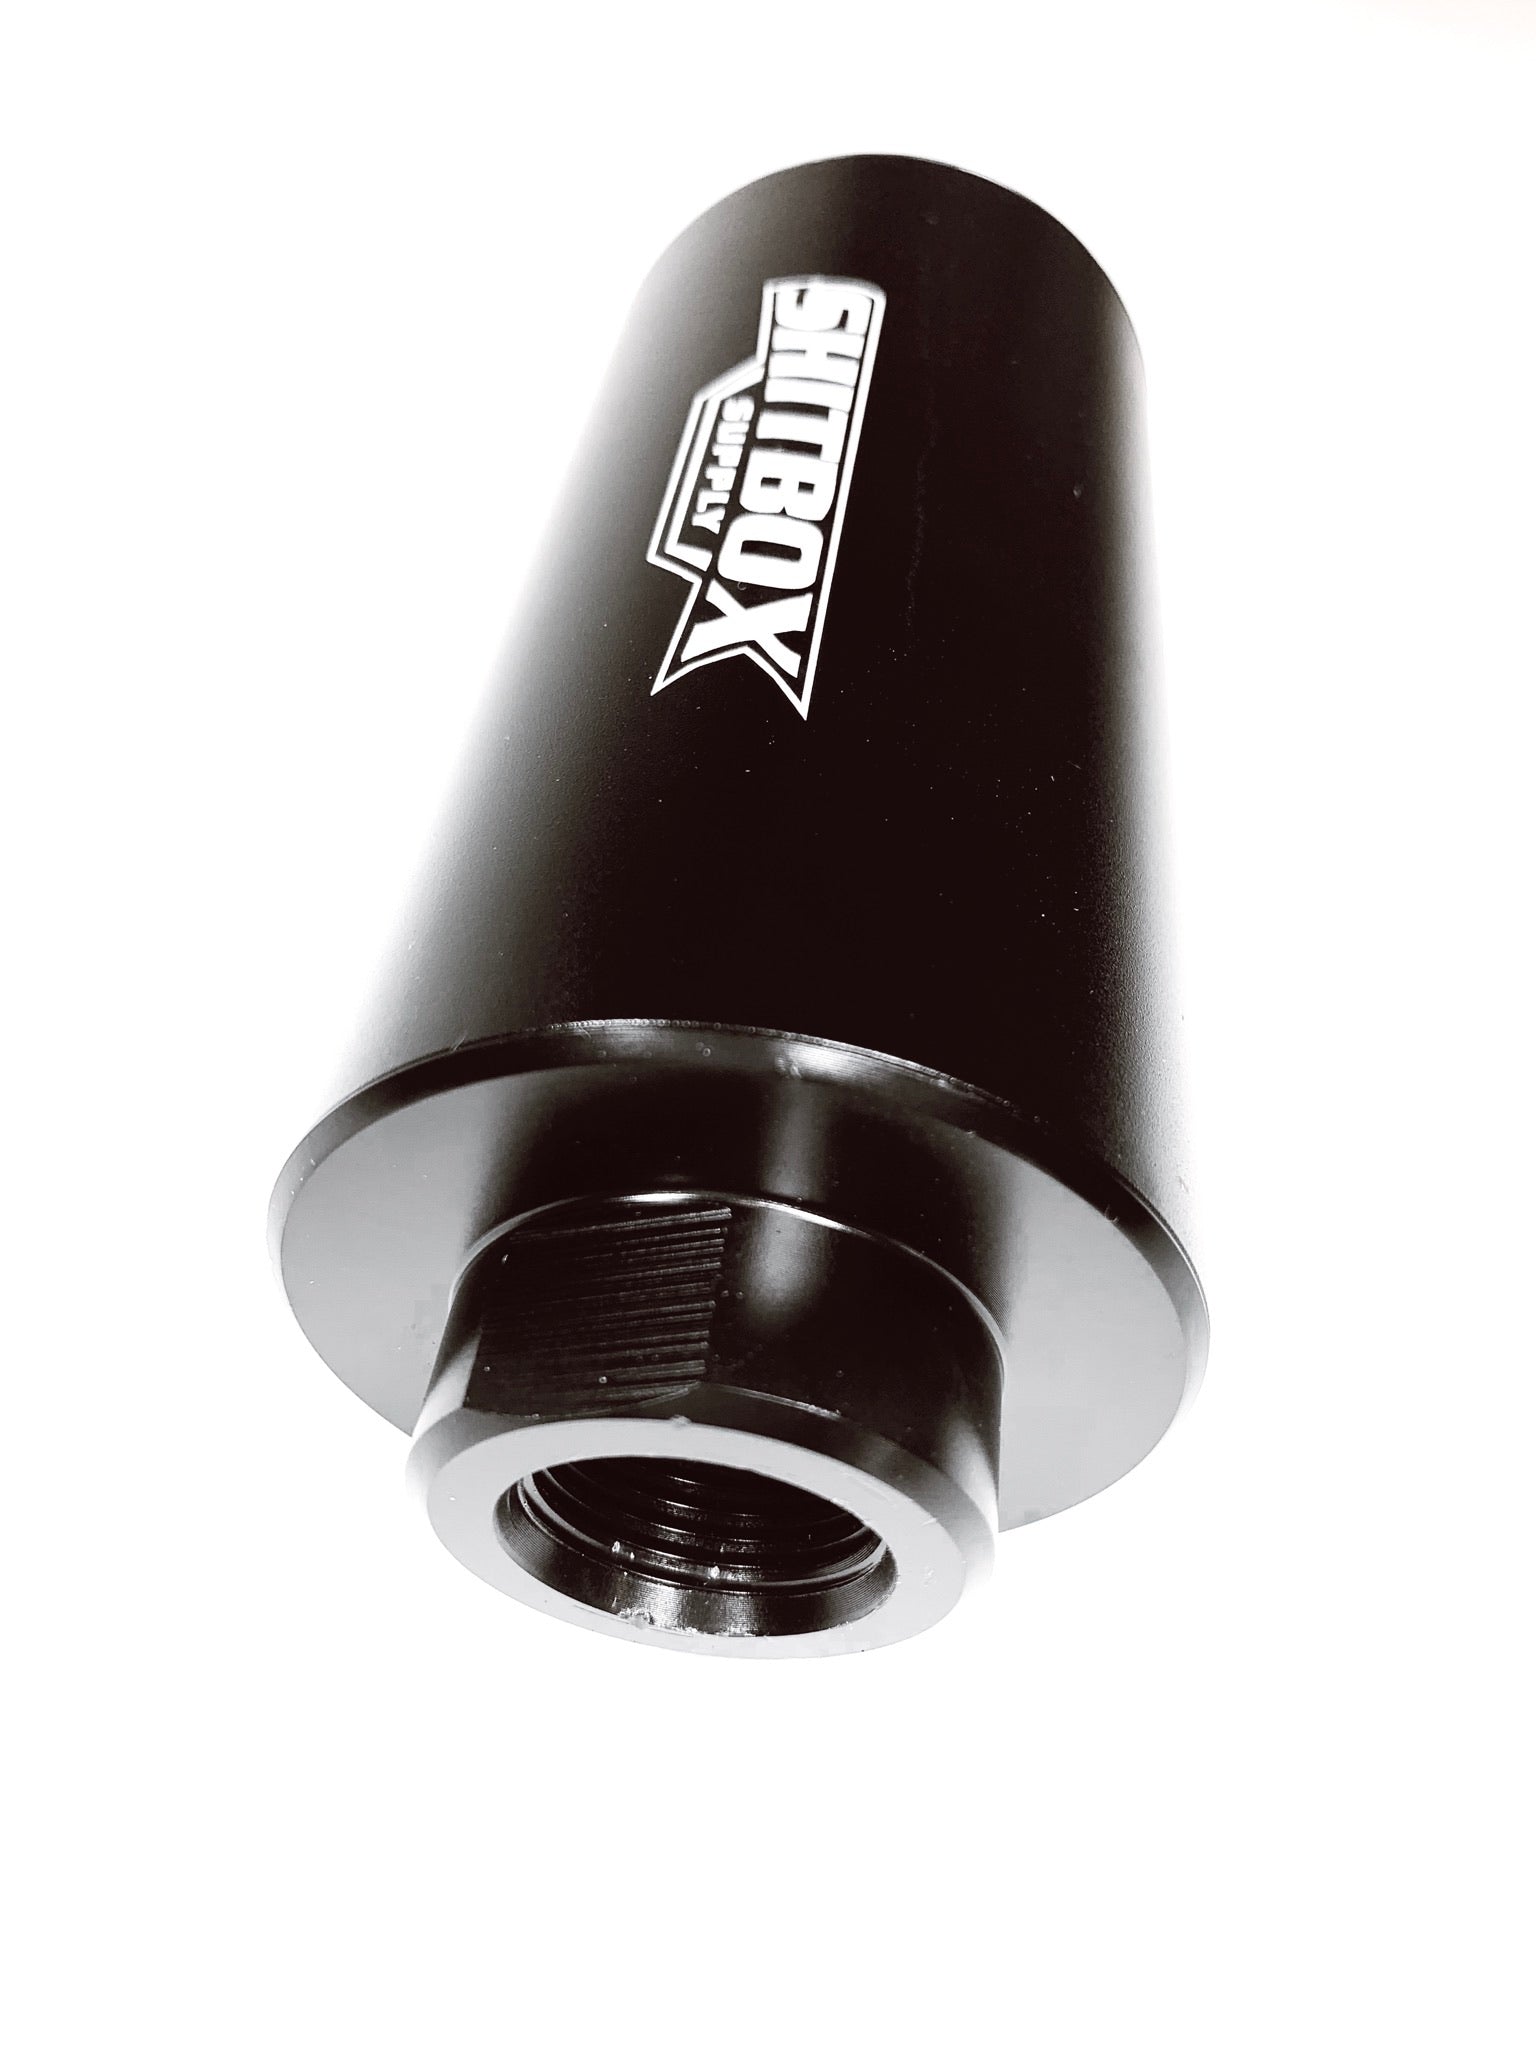 SEP/SBS 044 inline and in-tank Fuel Filters